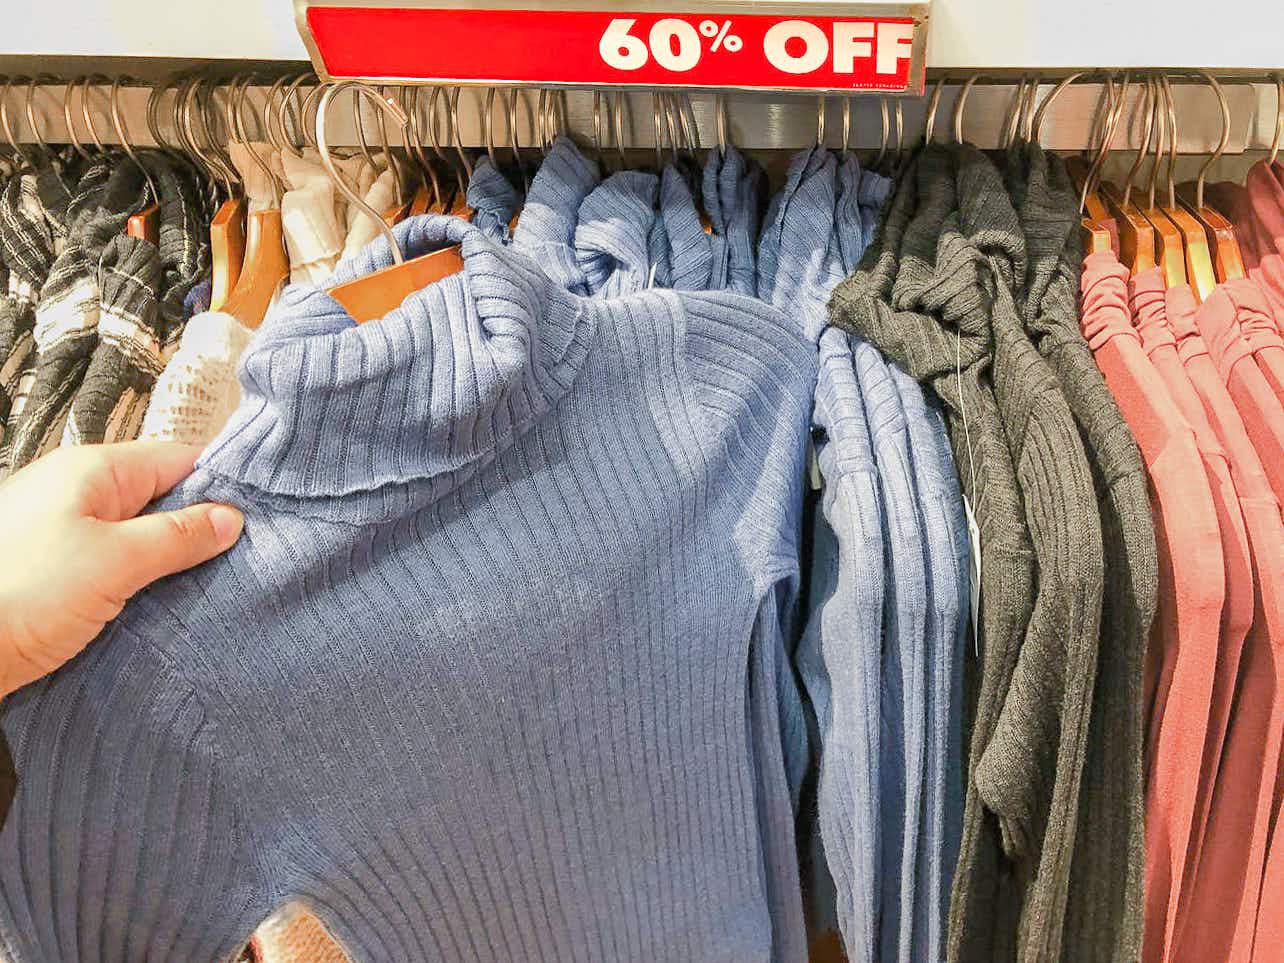 A person taking a turtleneck sweater from a rack of them marked as 60% off at American Eagle.